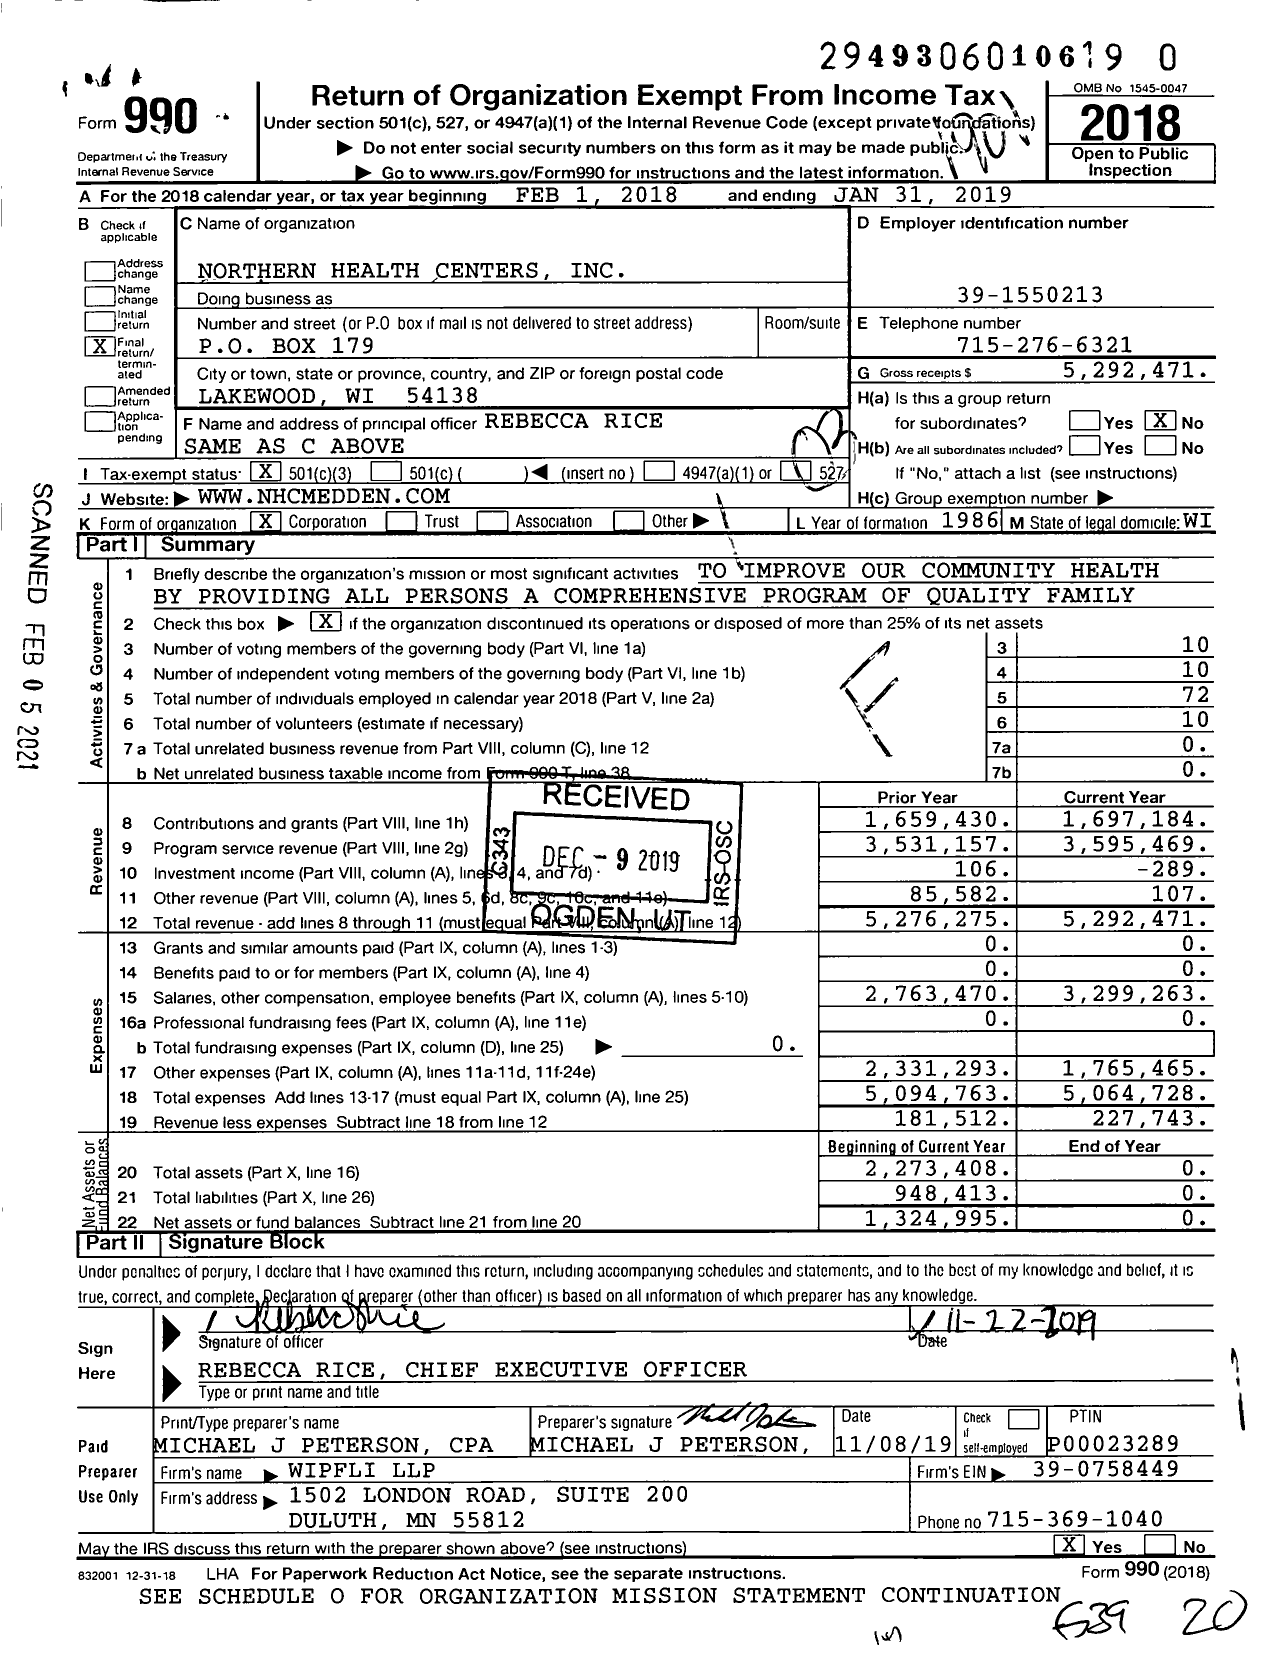 Image of first page of 2018 Form 990 for Northern Health Centers